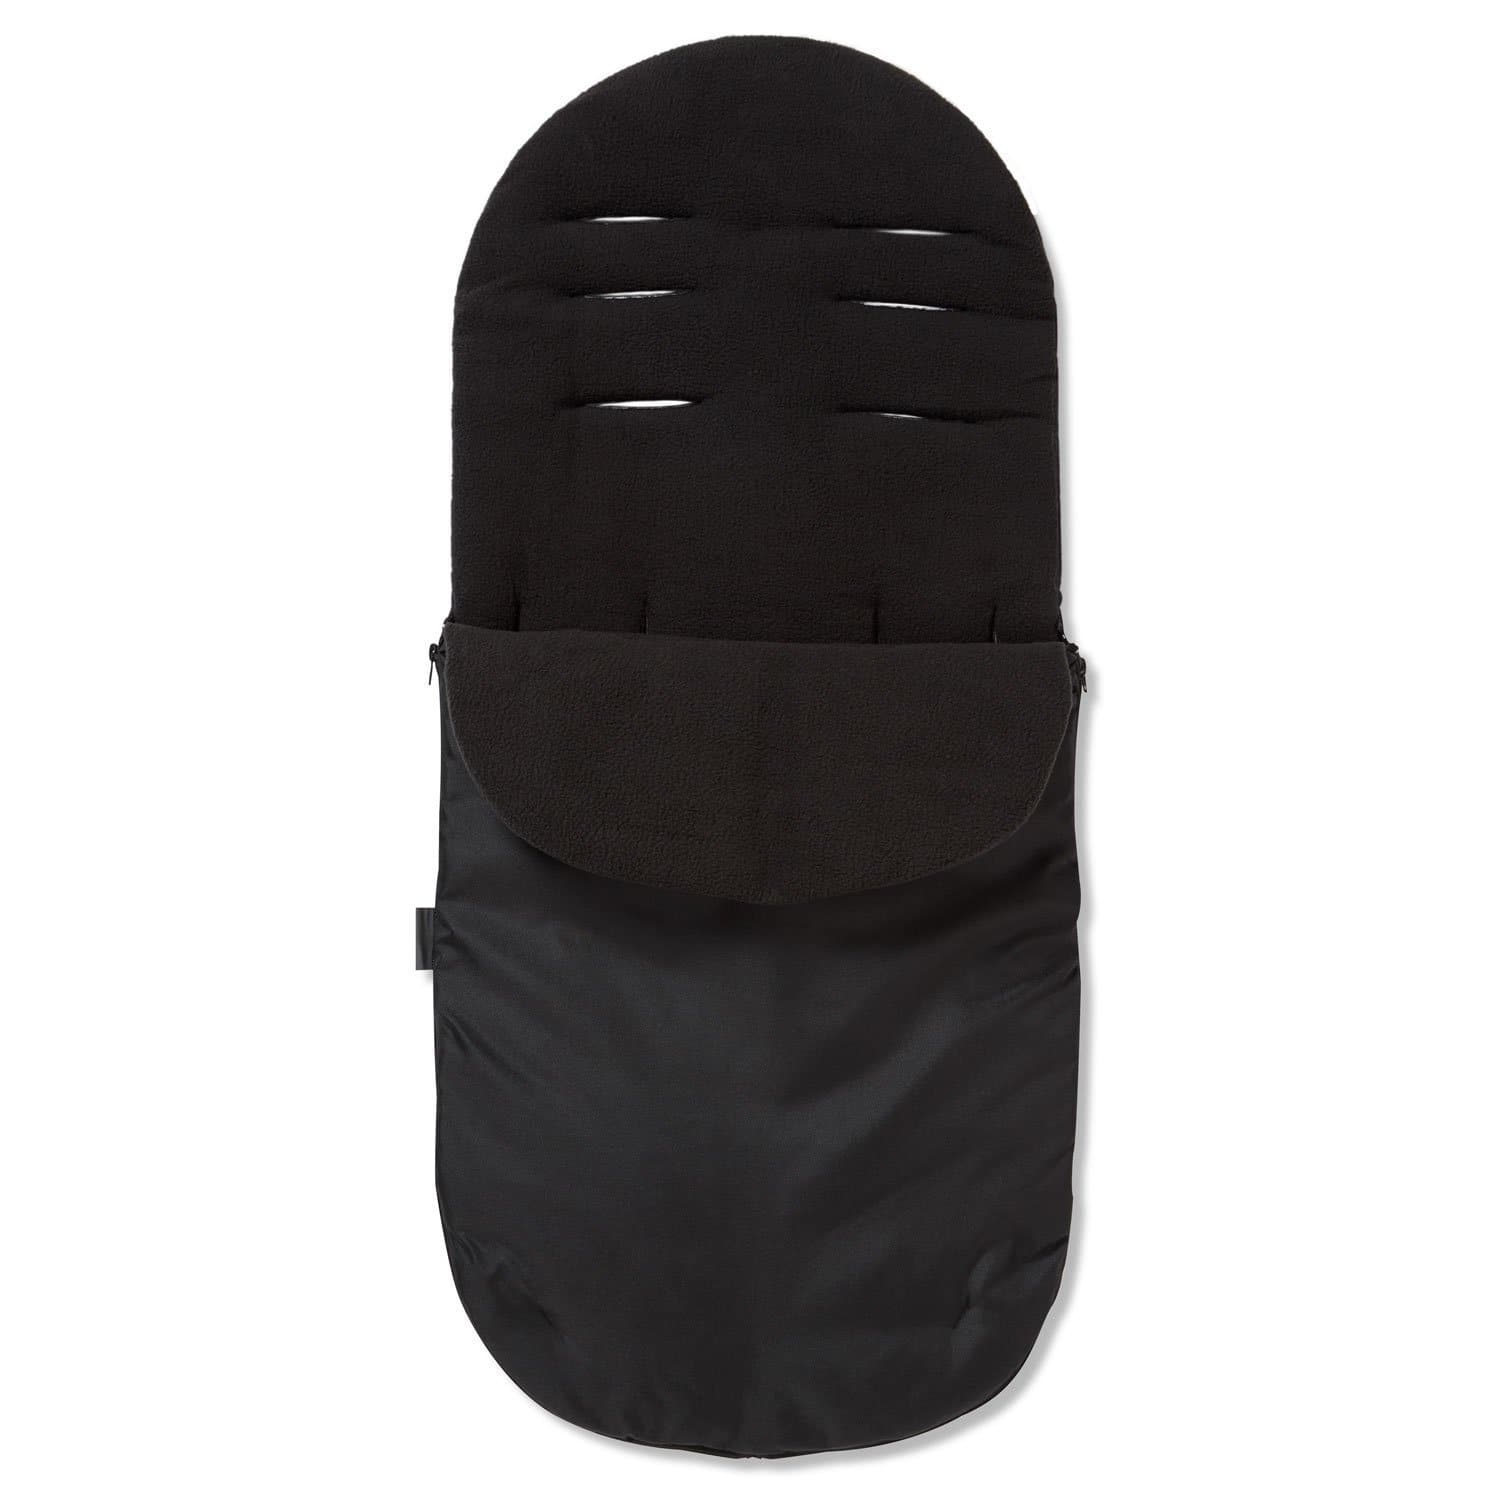 Footmuff / Cosy Toes Compatible with Excel - Black / Fits All Models | For Your Little One